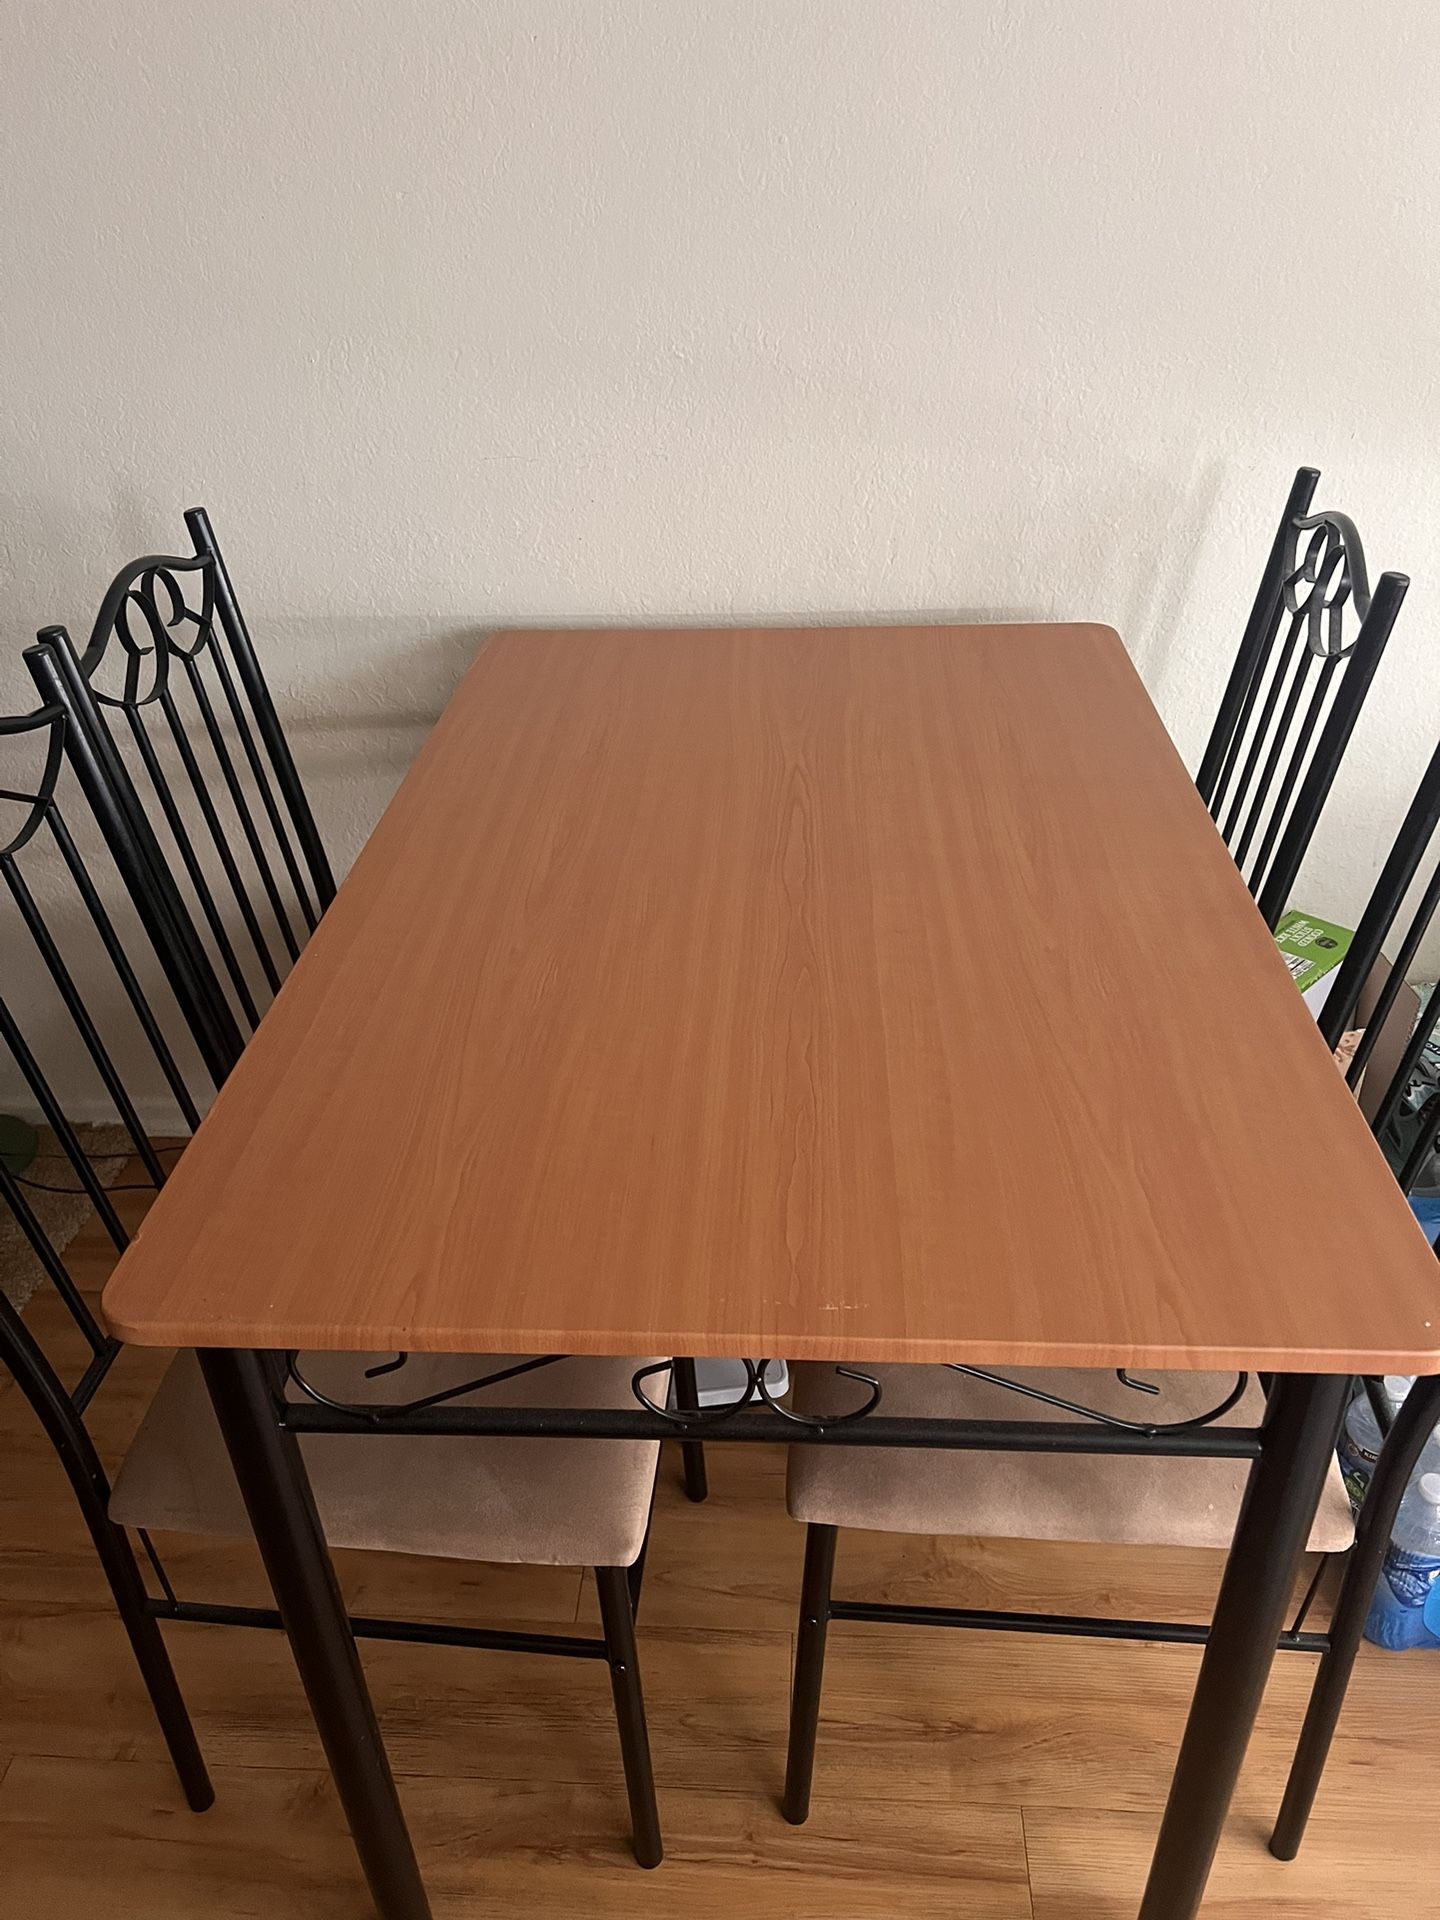 Dinning Table With Chair 